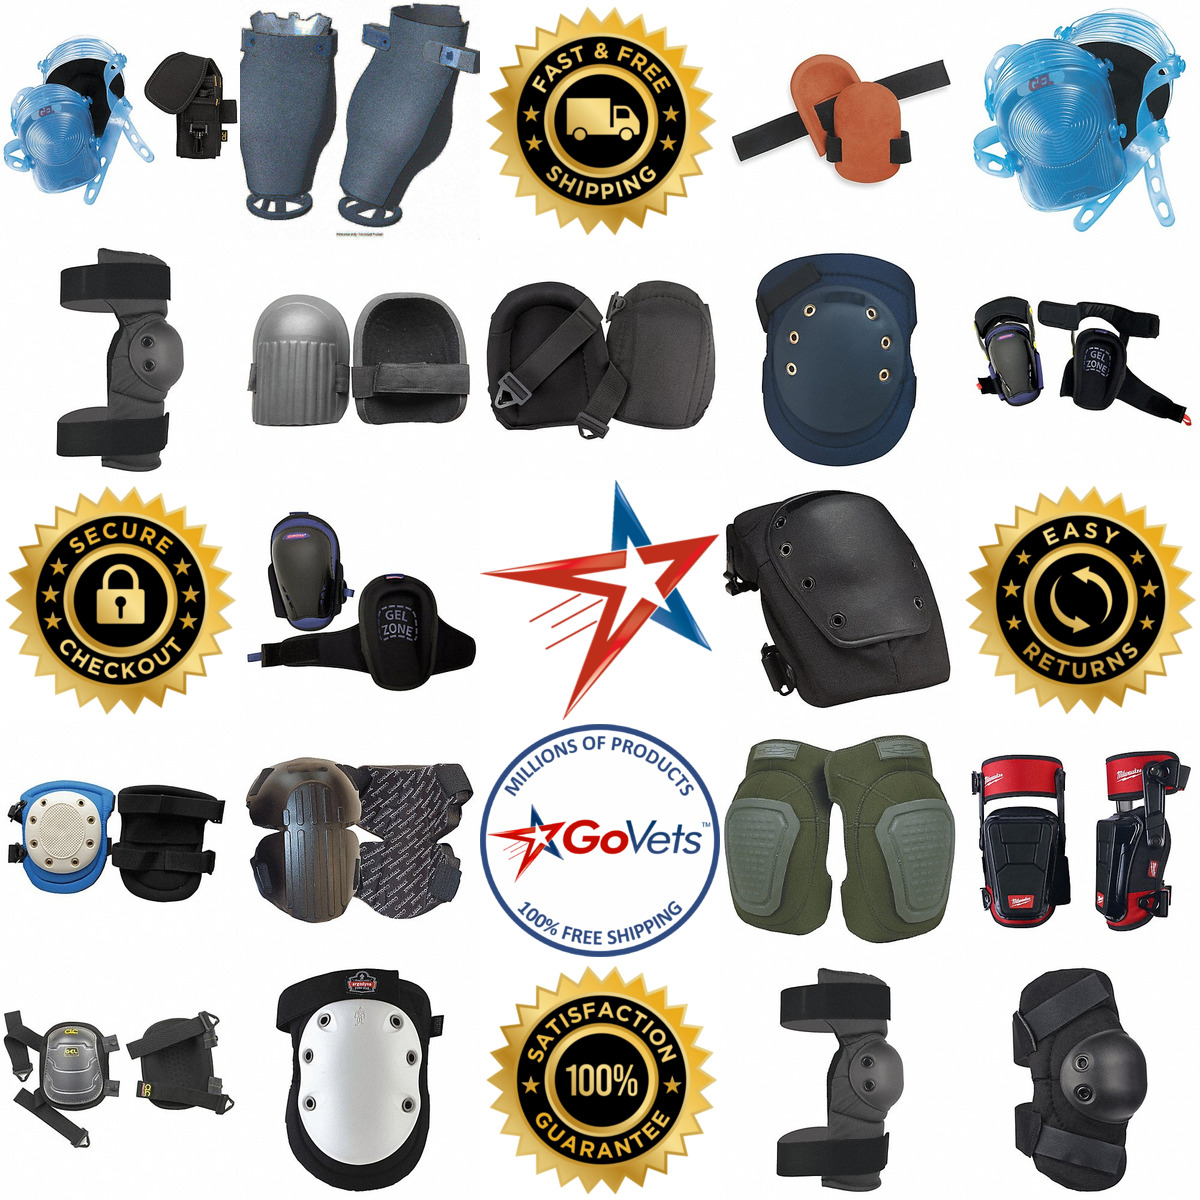 A selection of Protective Elbow and Knee Pads products on GoVets